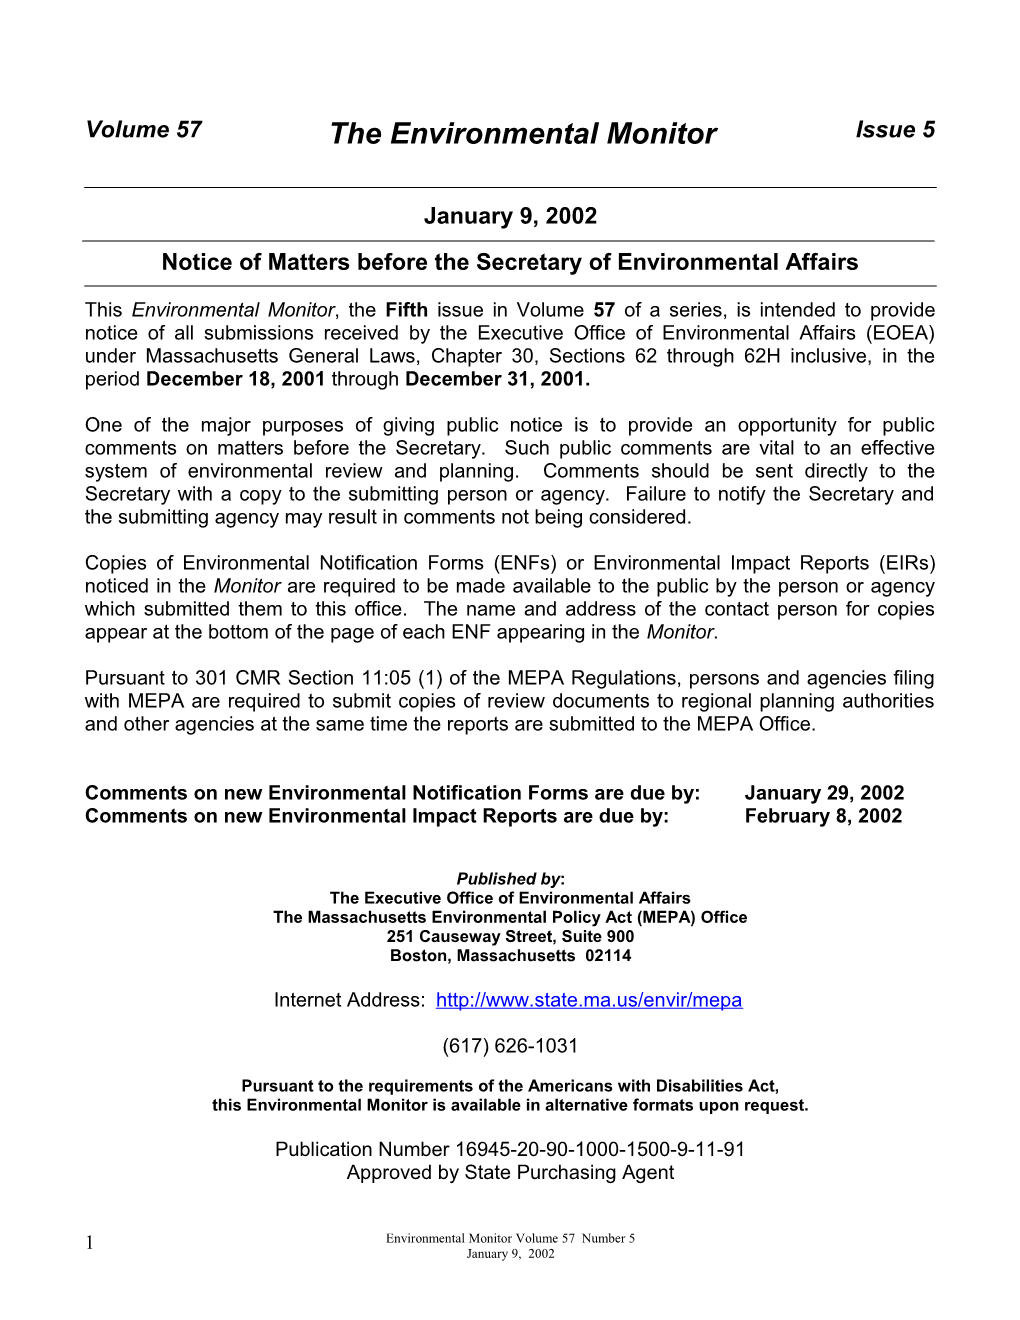 Volume 55 the ENVIRONMENTAL MONITOR Number 5